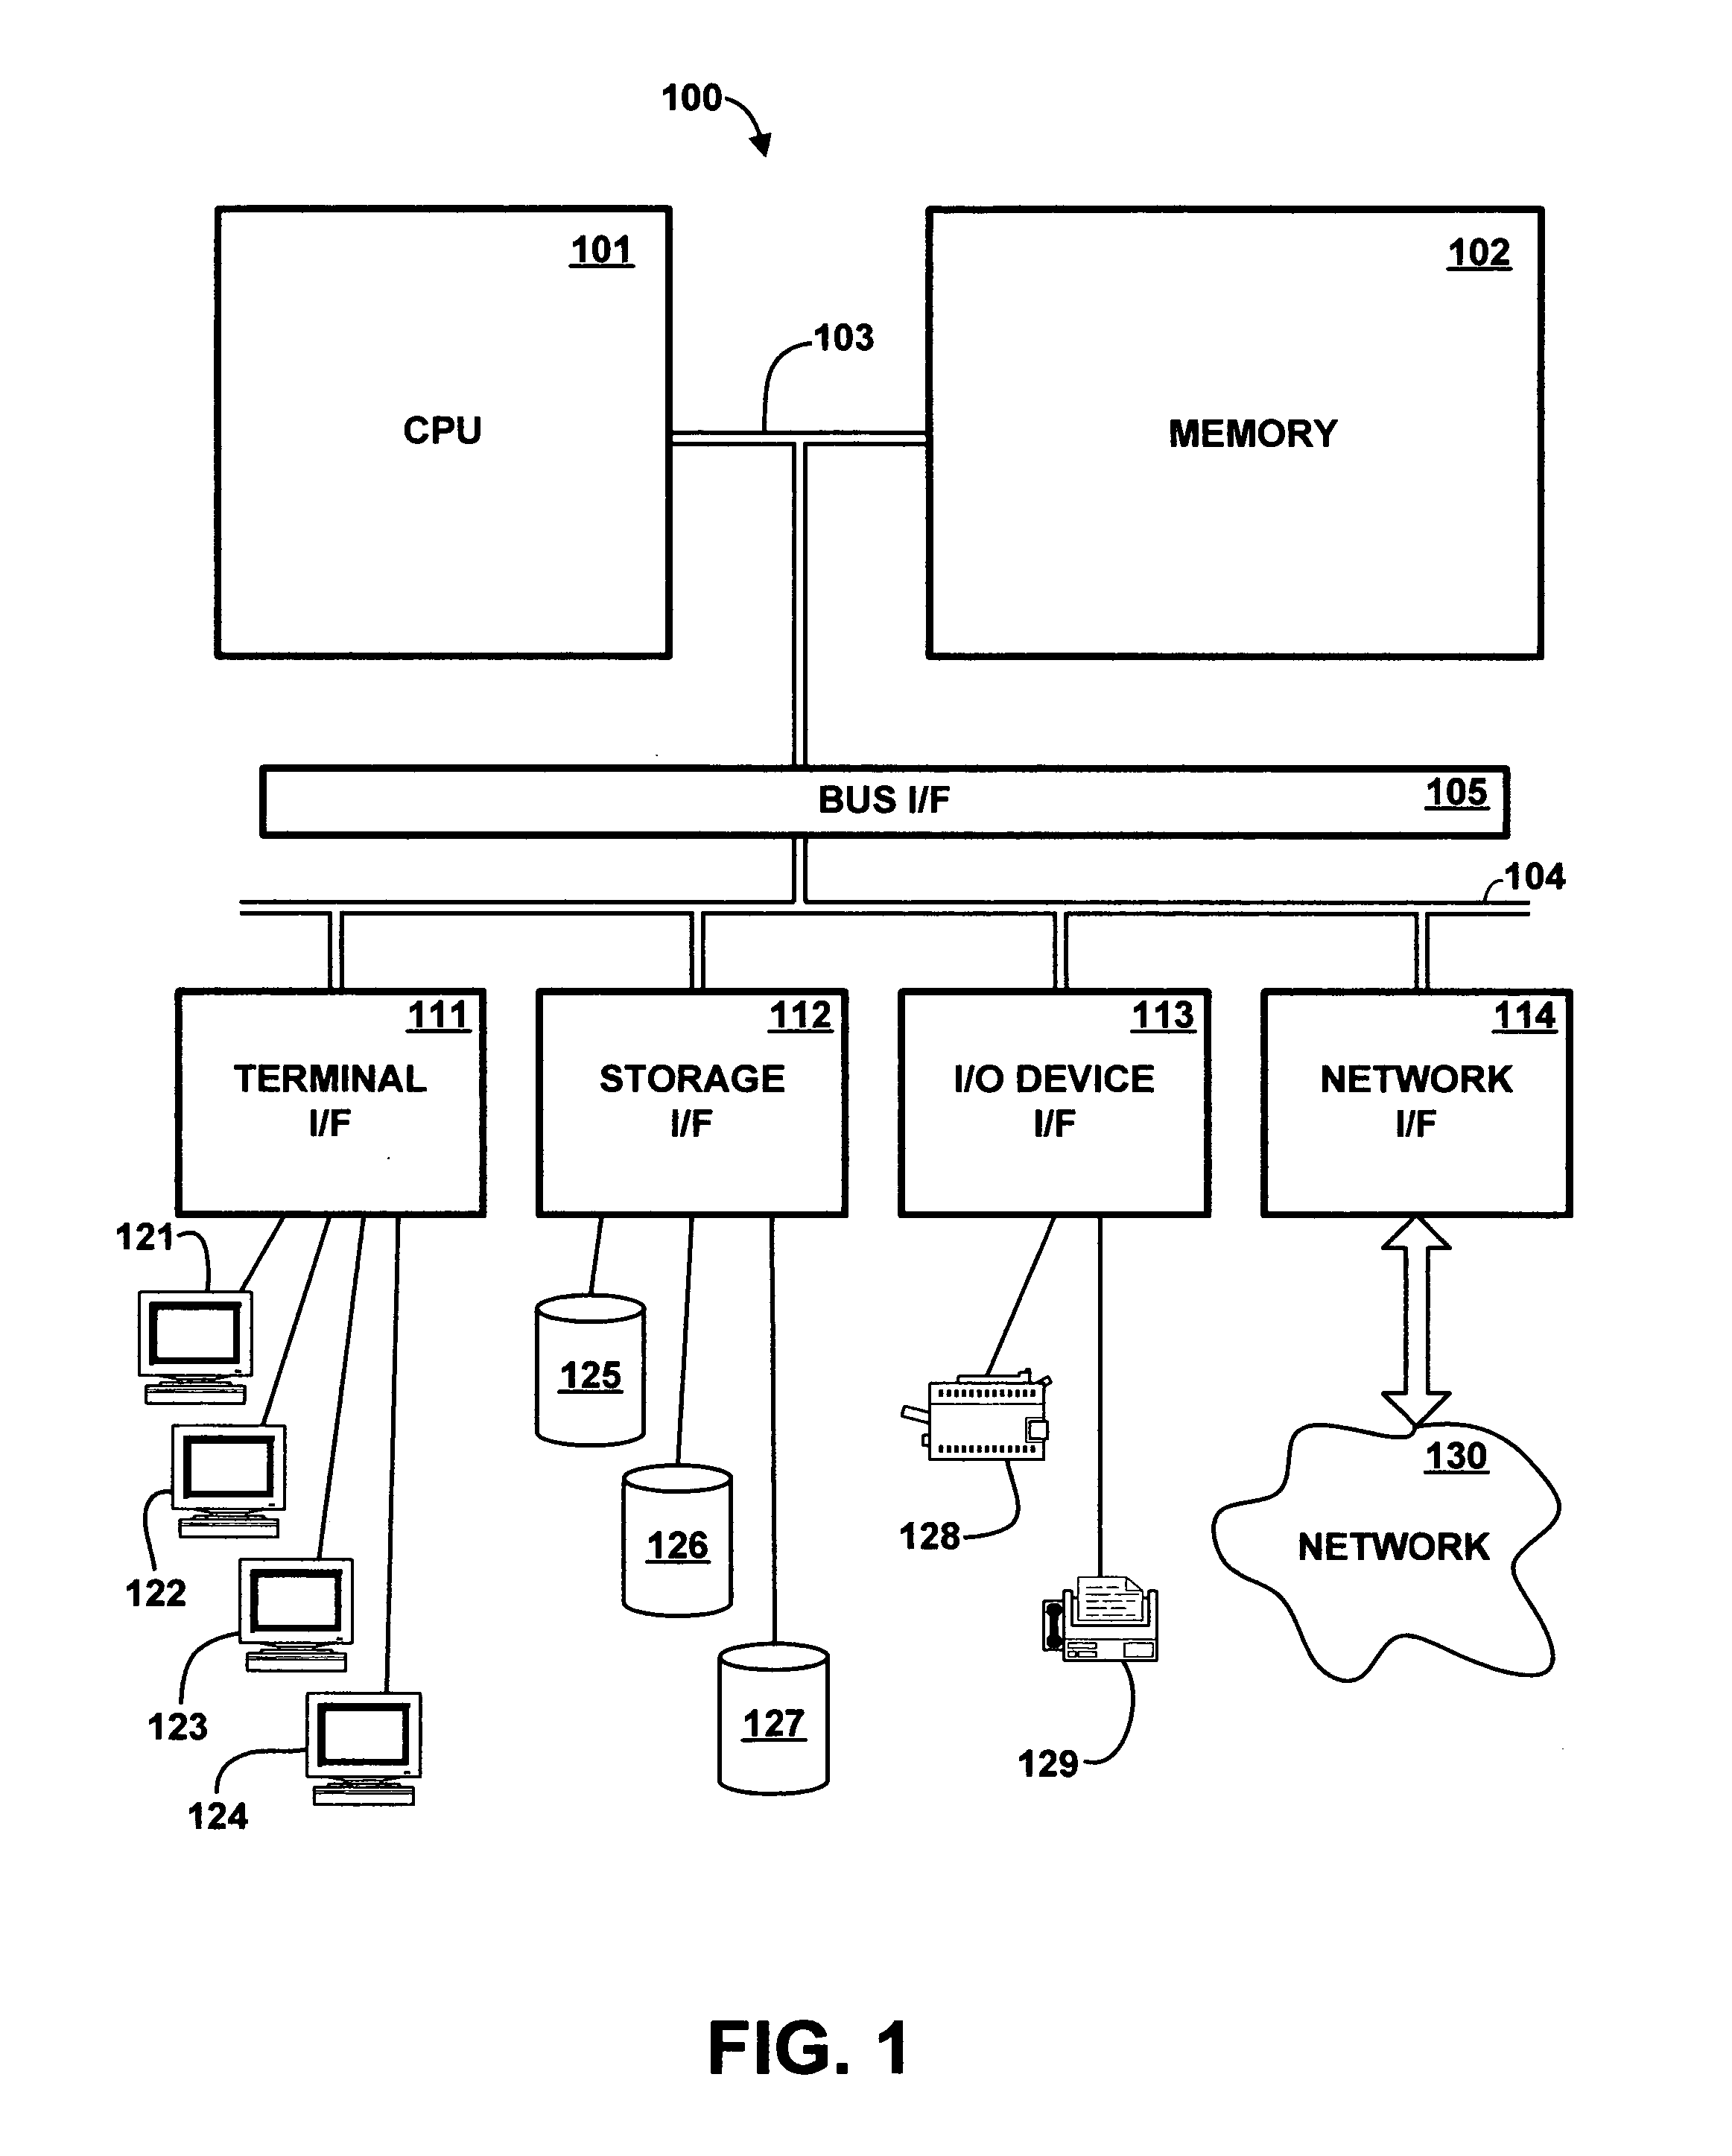 Method and apparatus for dynamic compilation of selective code blocks of computer programming code to different memory locations